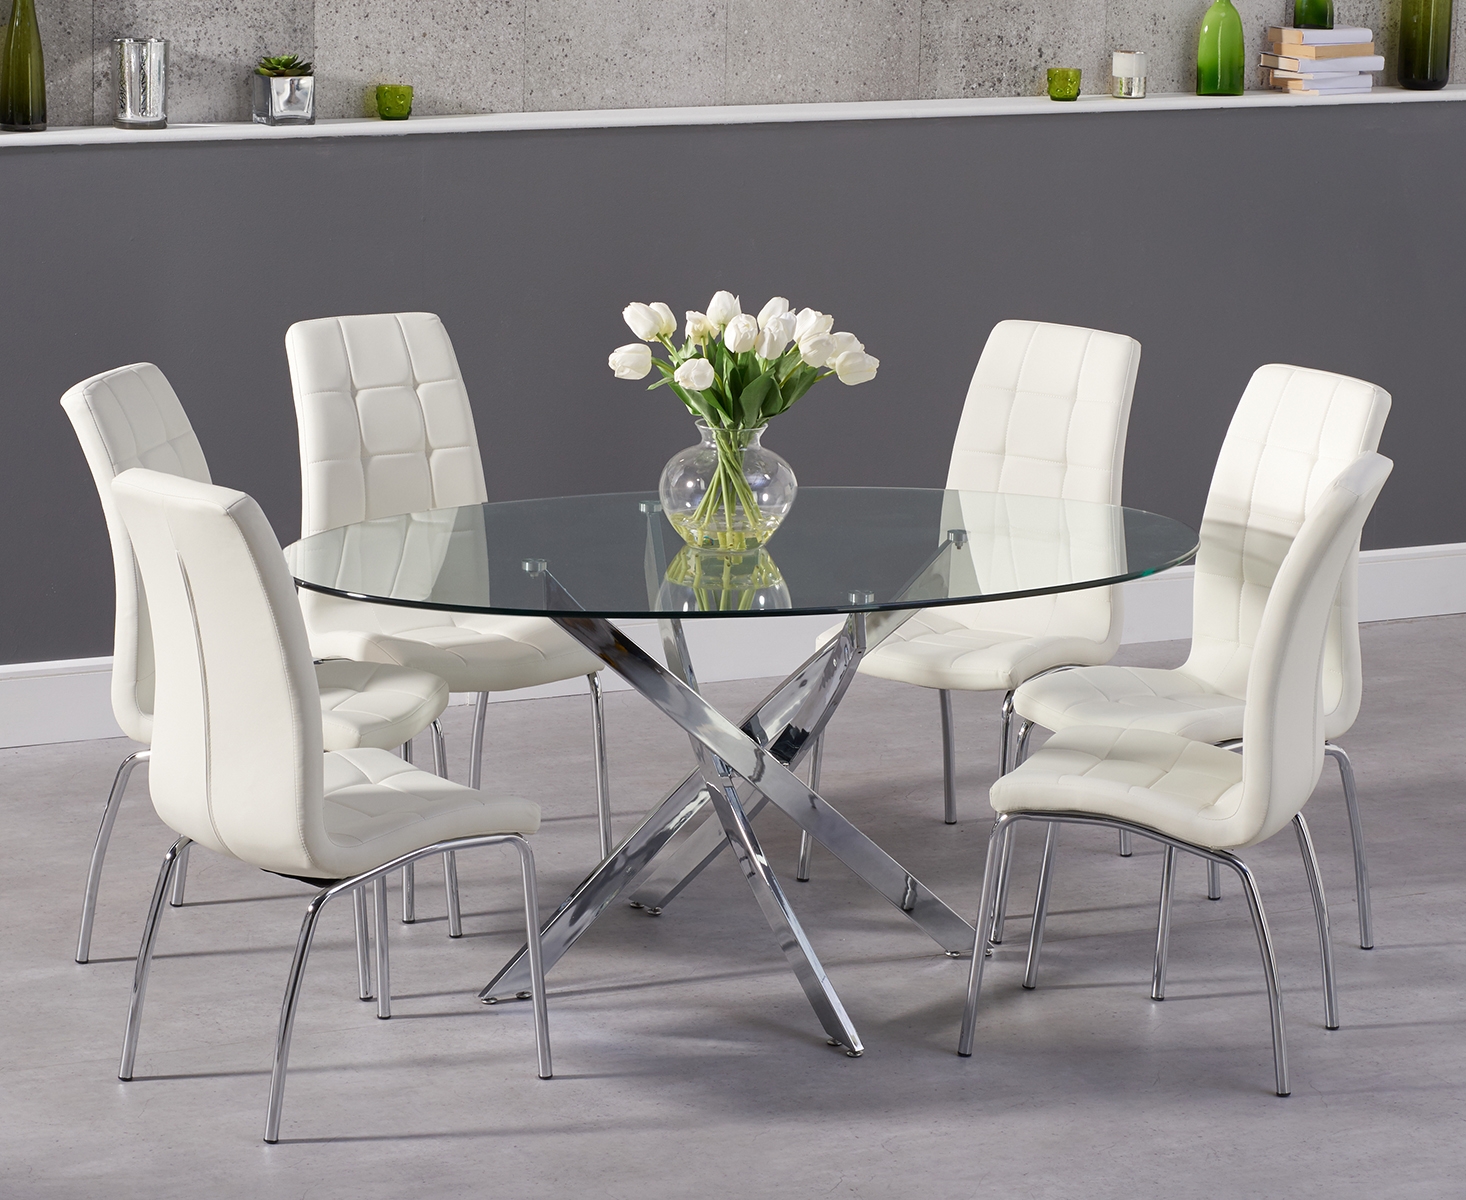 Photo 2 of Bernini 165cm oval glass dining table with 4 grey enzo chairs